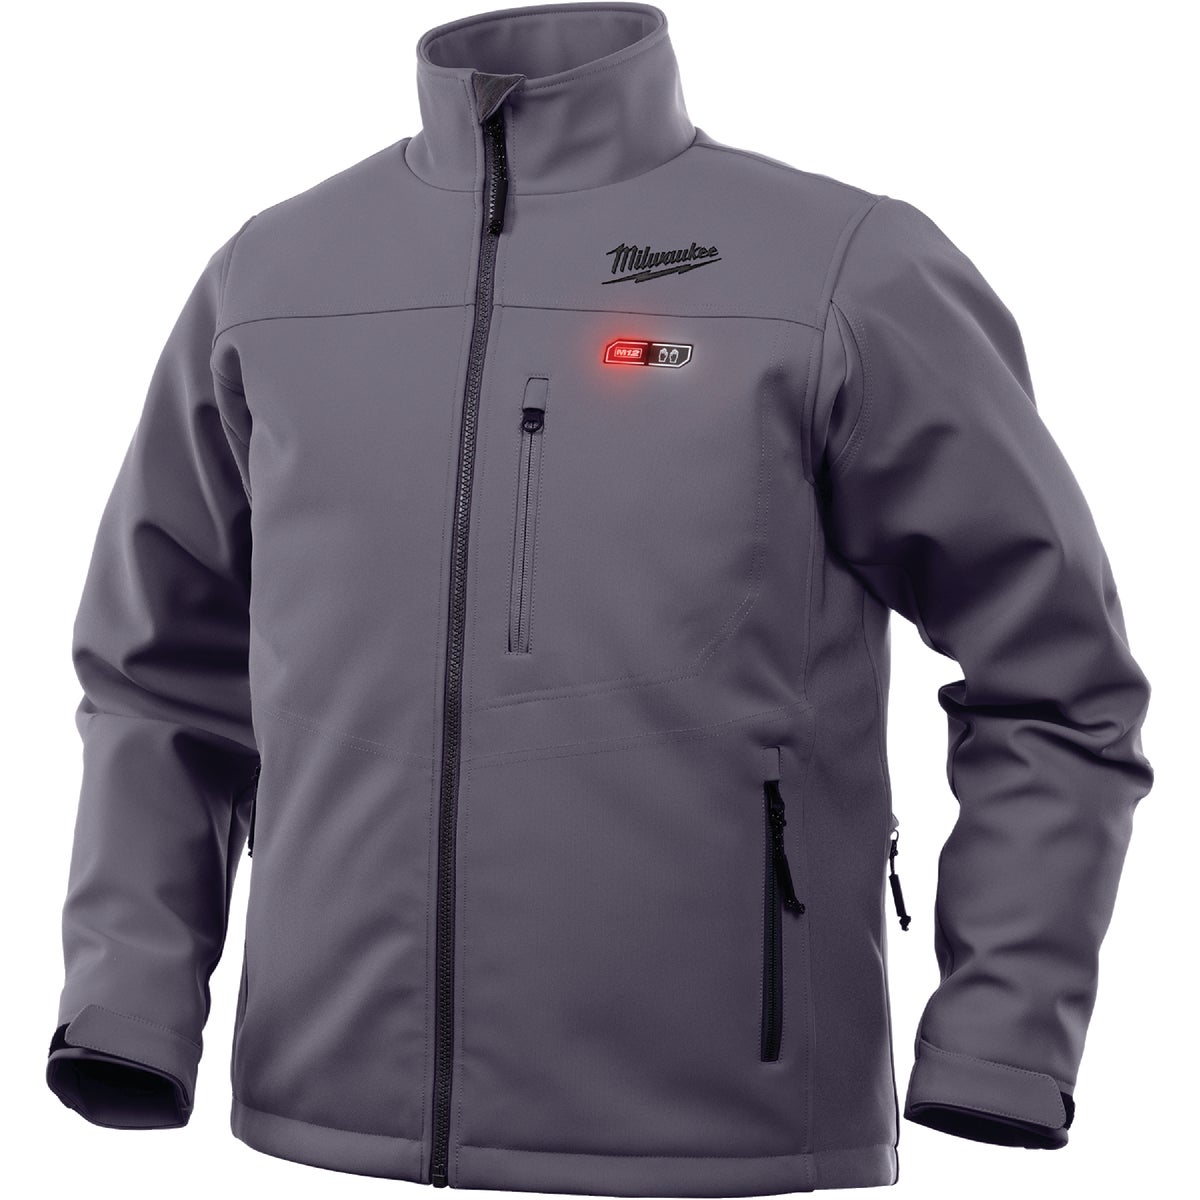 Item 703813, The M12 TOUGHSHELL Heated Jacket is powered by M12 REDLITHIUM Battery 